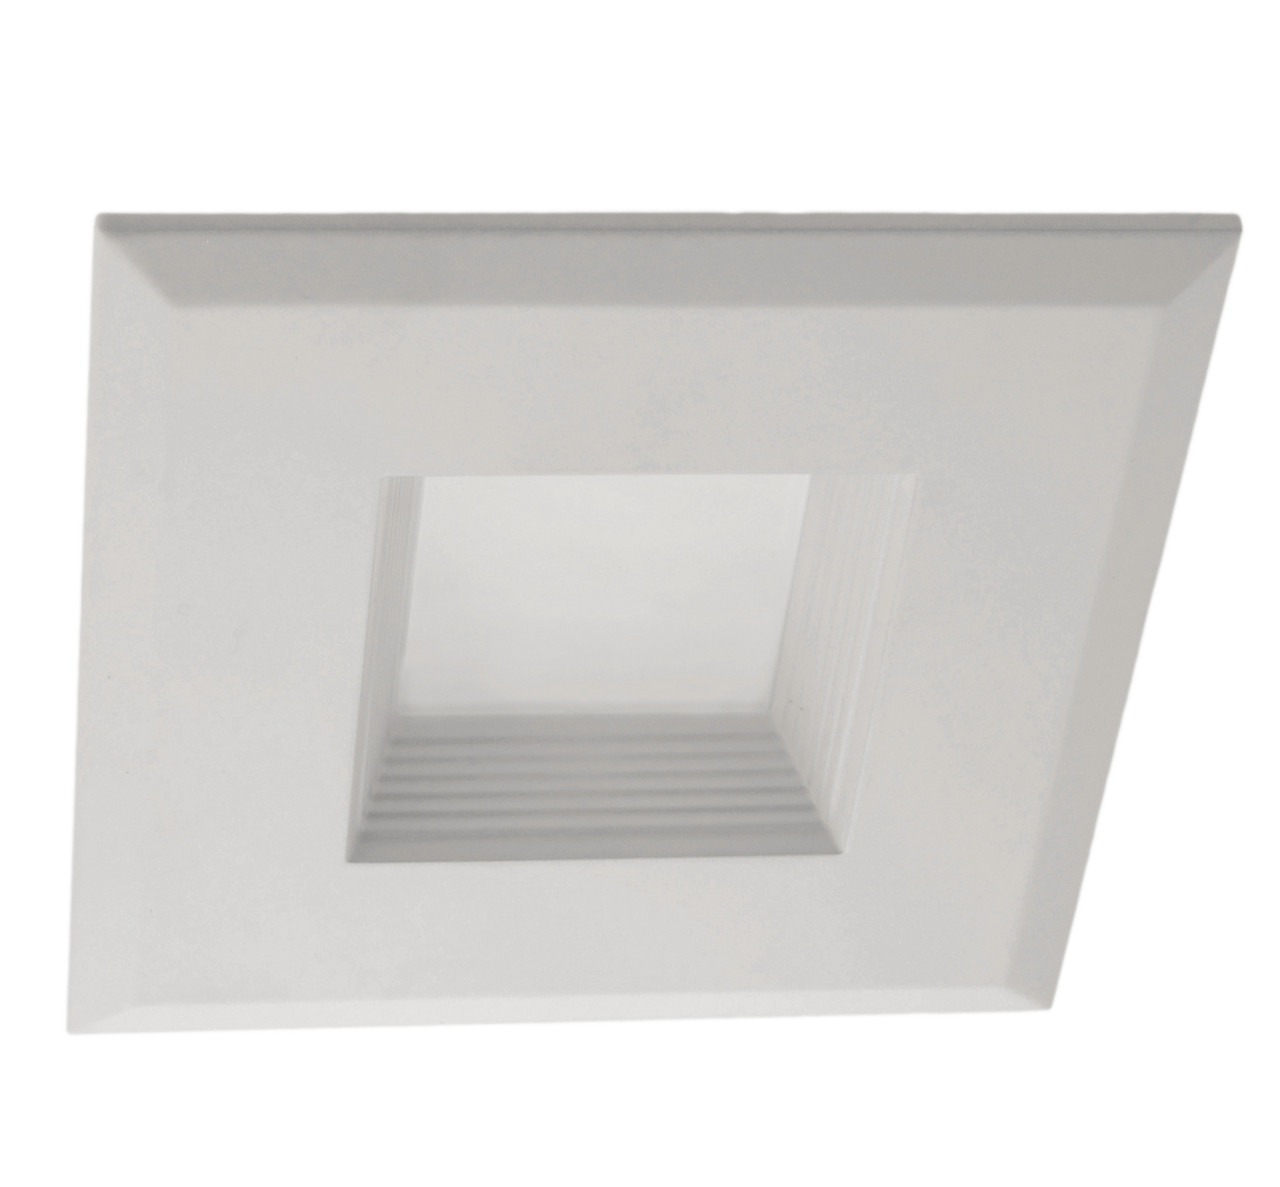 NICOR LIGHTING DQR3-10-120-2K-WH-BF 3 in. White Square LED Recessed Downlight in 2700K